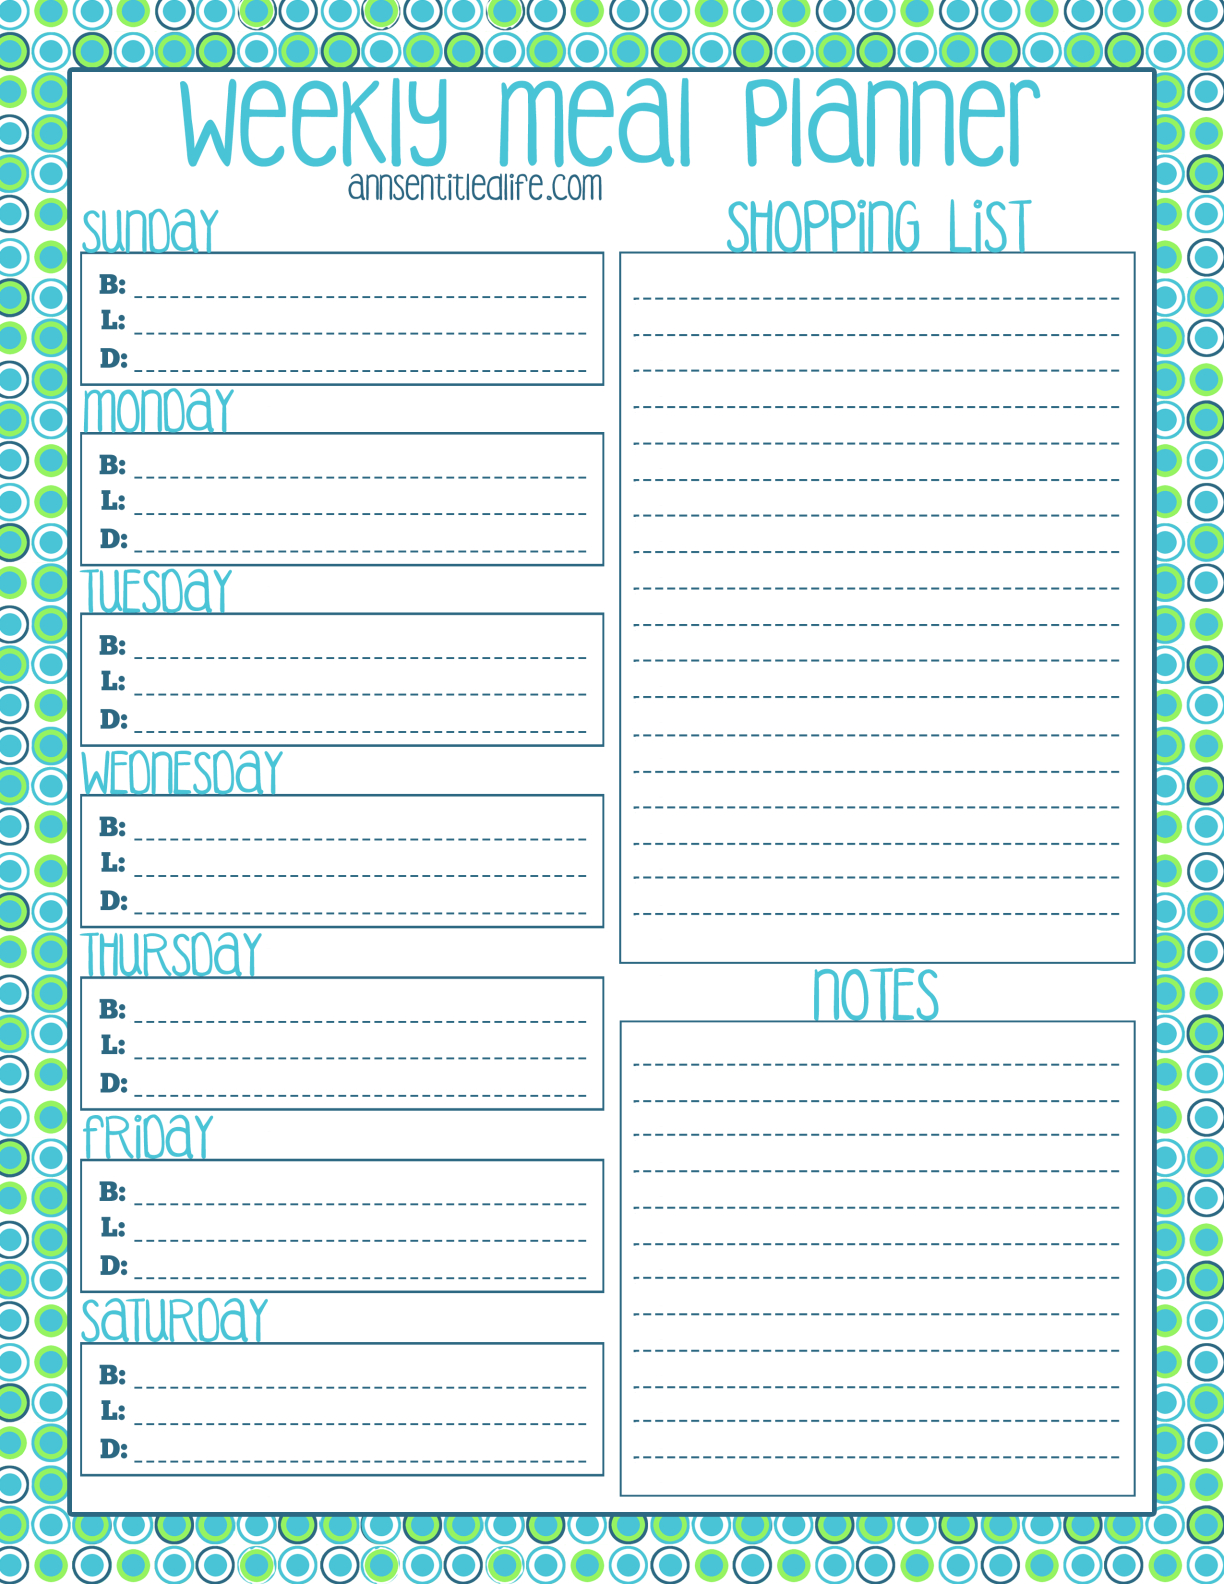 Free Printable Recipe Card, Meal Planner And Kitchen Labels - Free Printable Menu Planner